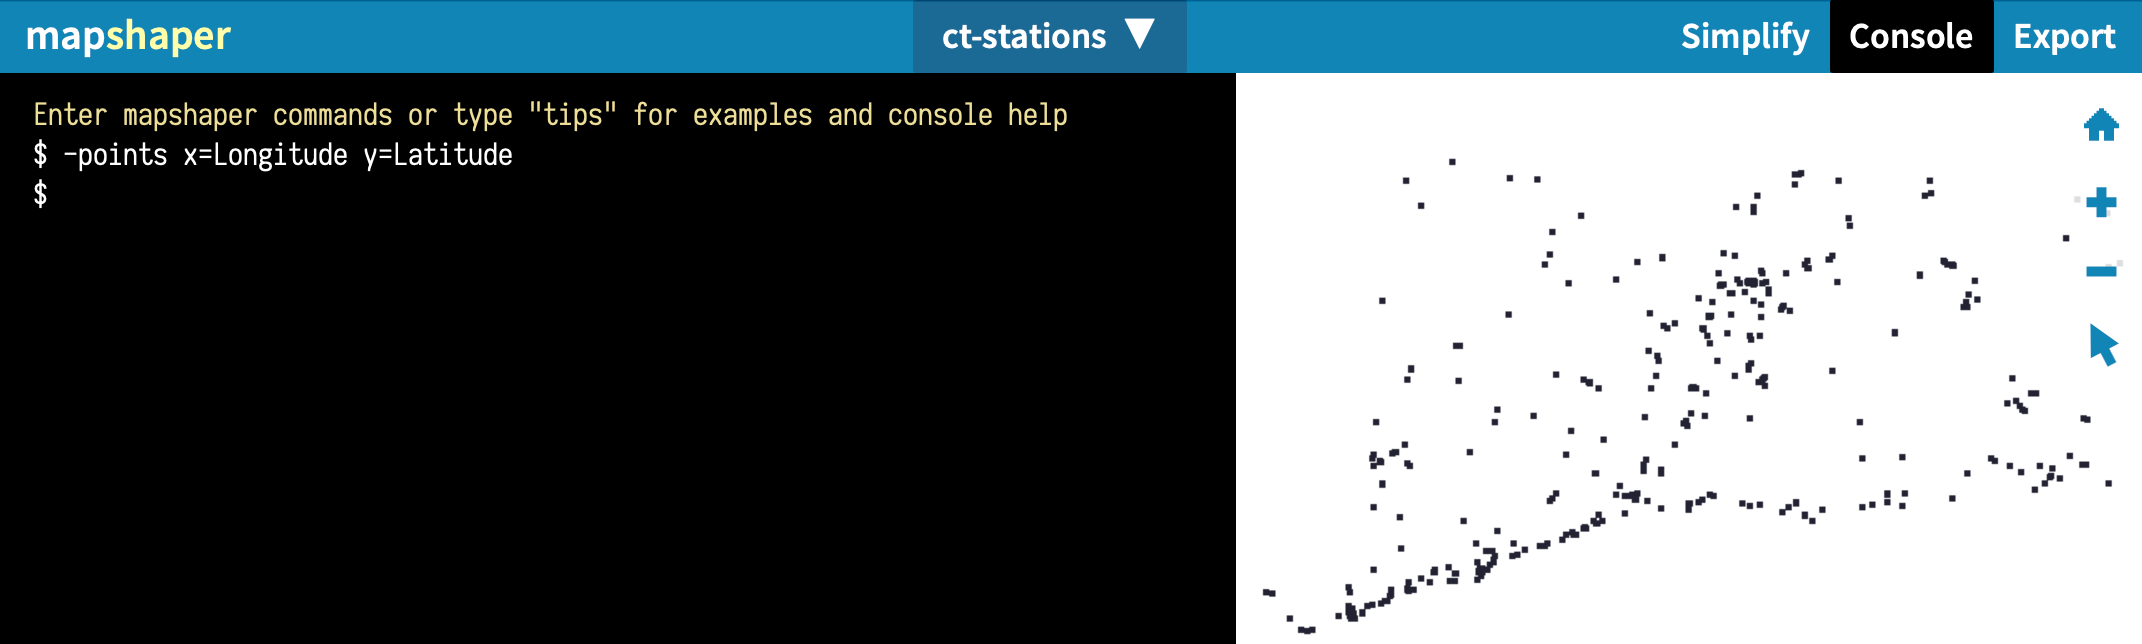 Use the Mapshaper -points command to display your CSV data as XY coordinates on a map.